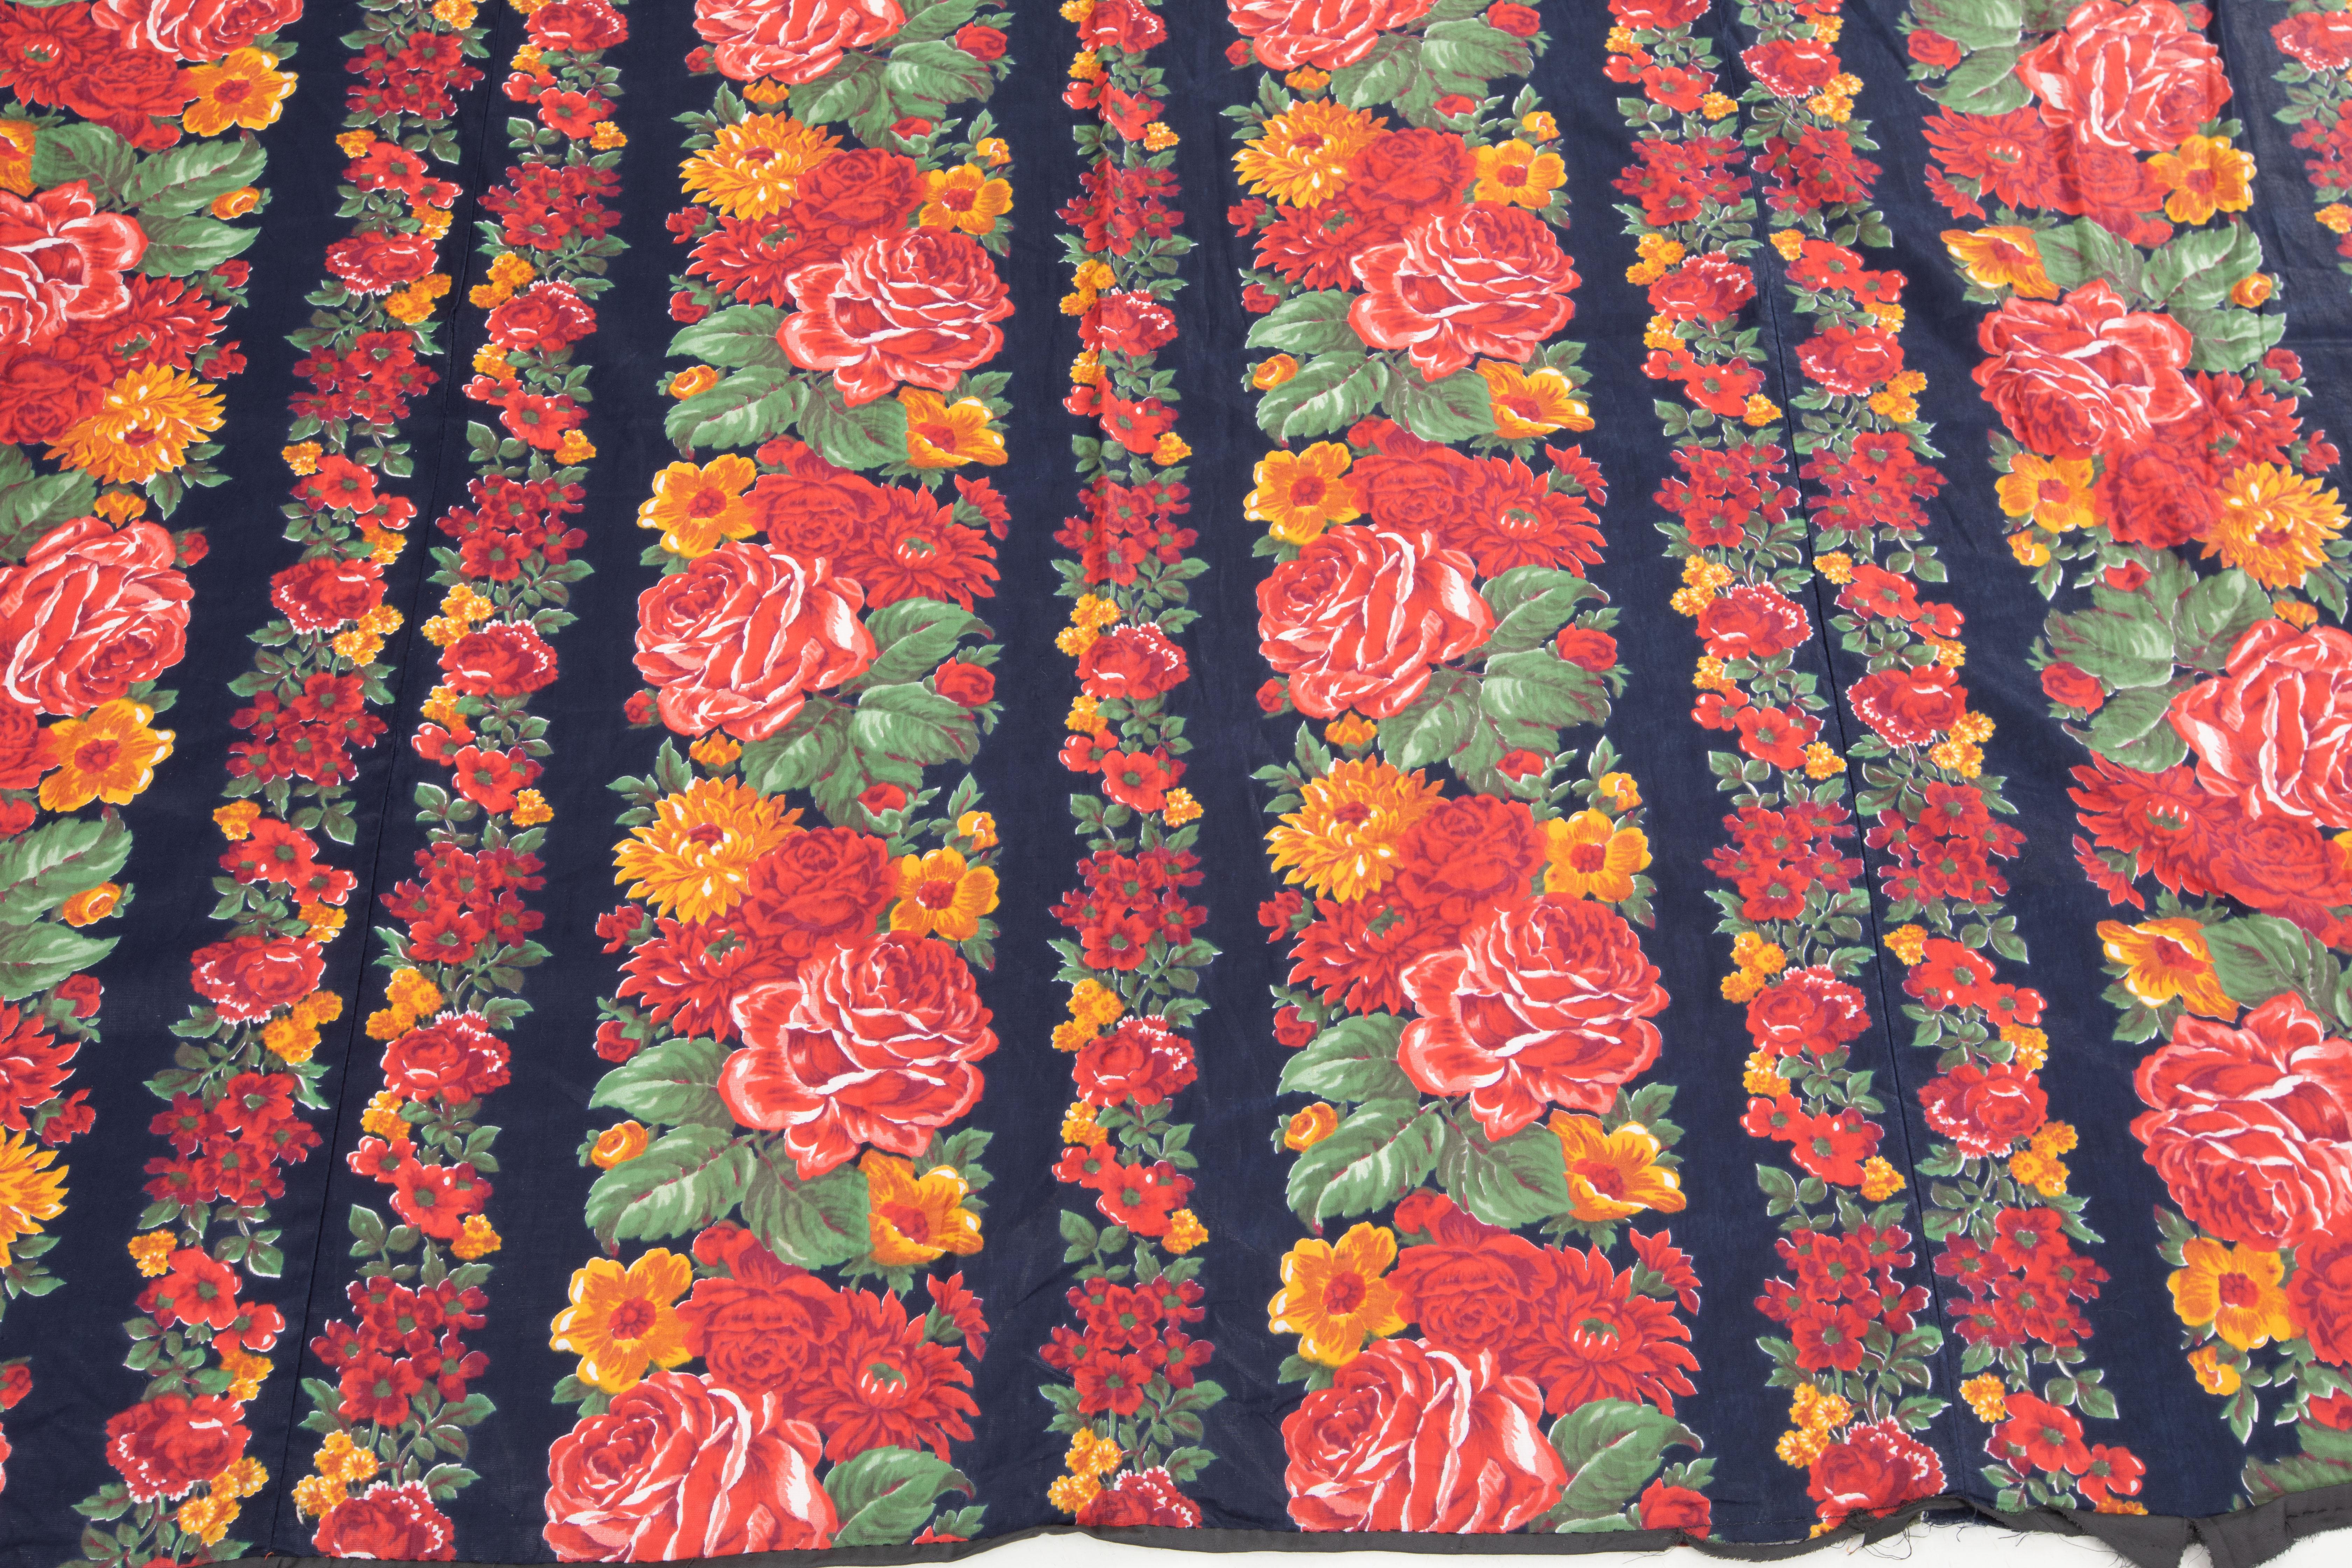 Russian Roller Printed Cotton Fabric Panel, Mid-20th Century or Earlier In Good Condition For Sale In Istanbul, TR